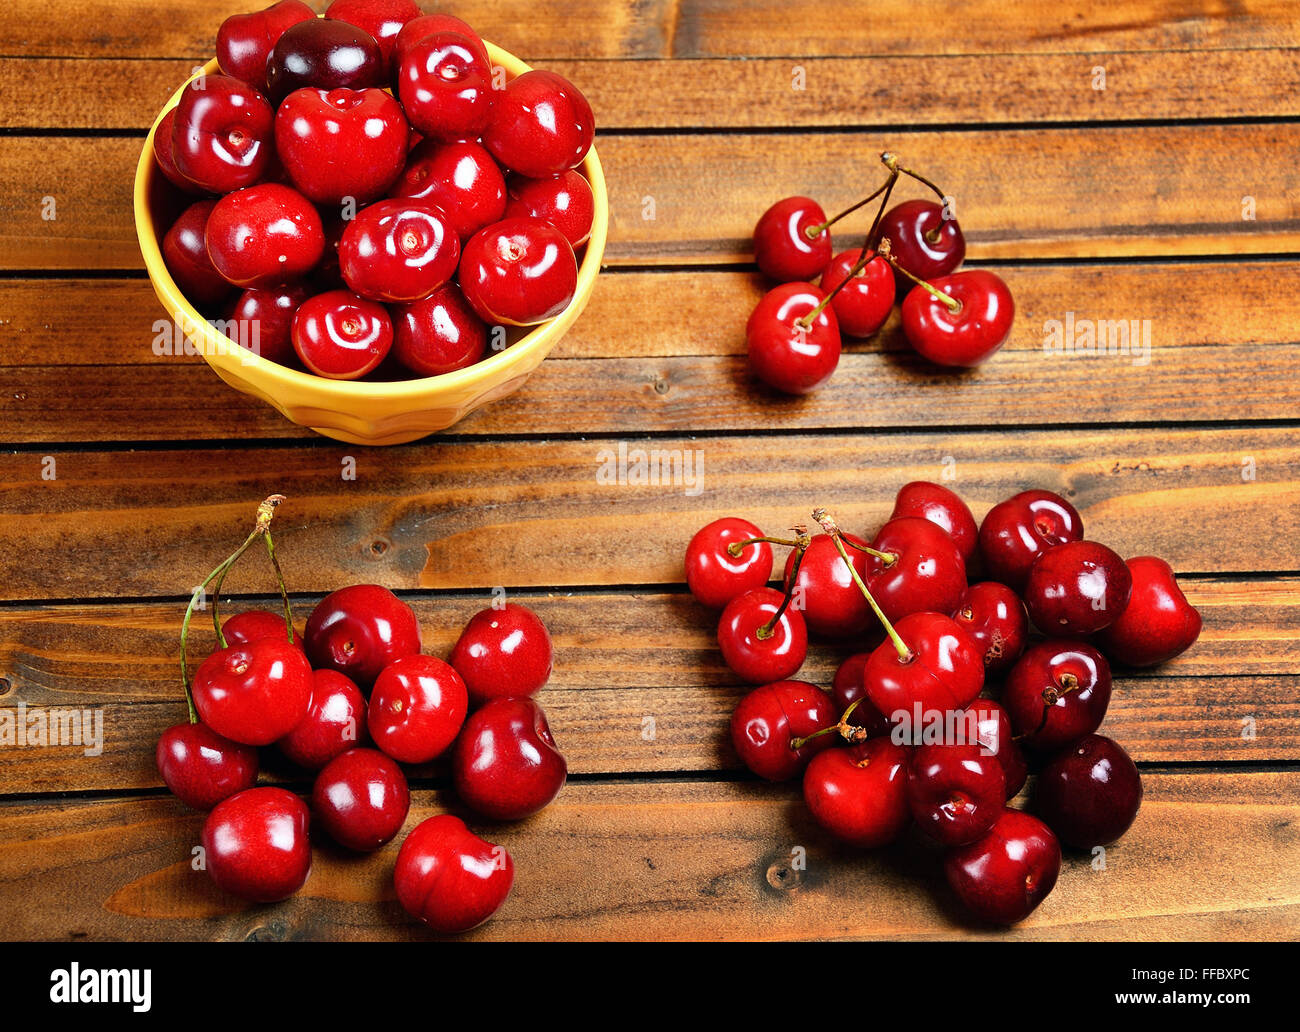 Yellow bowl with cherries on wooden table Stock Photo